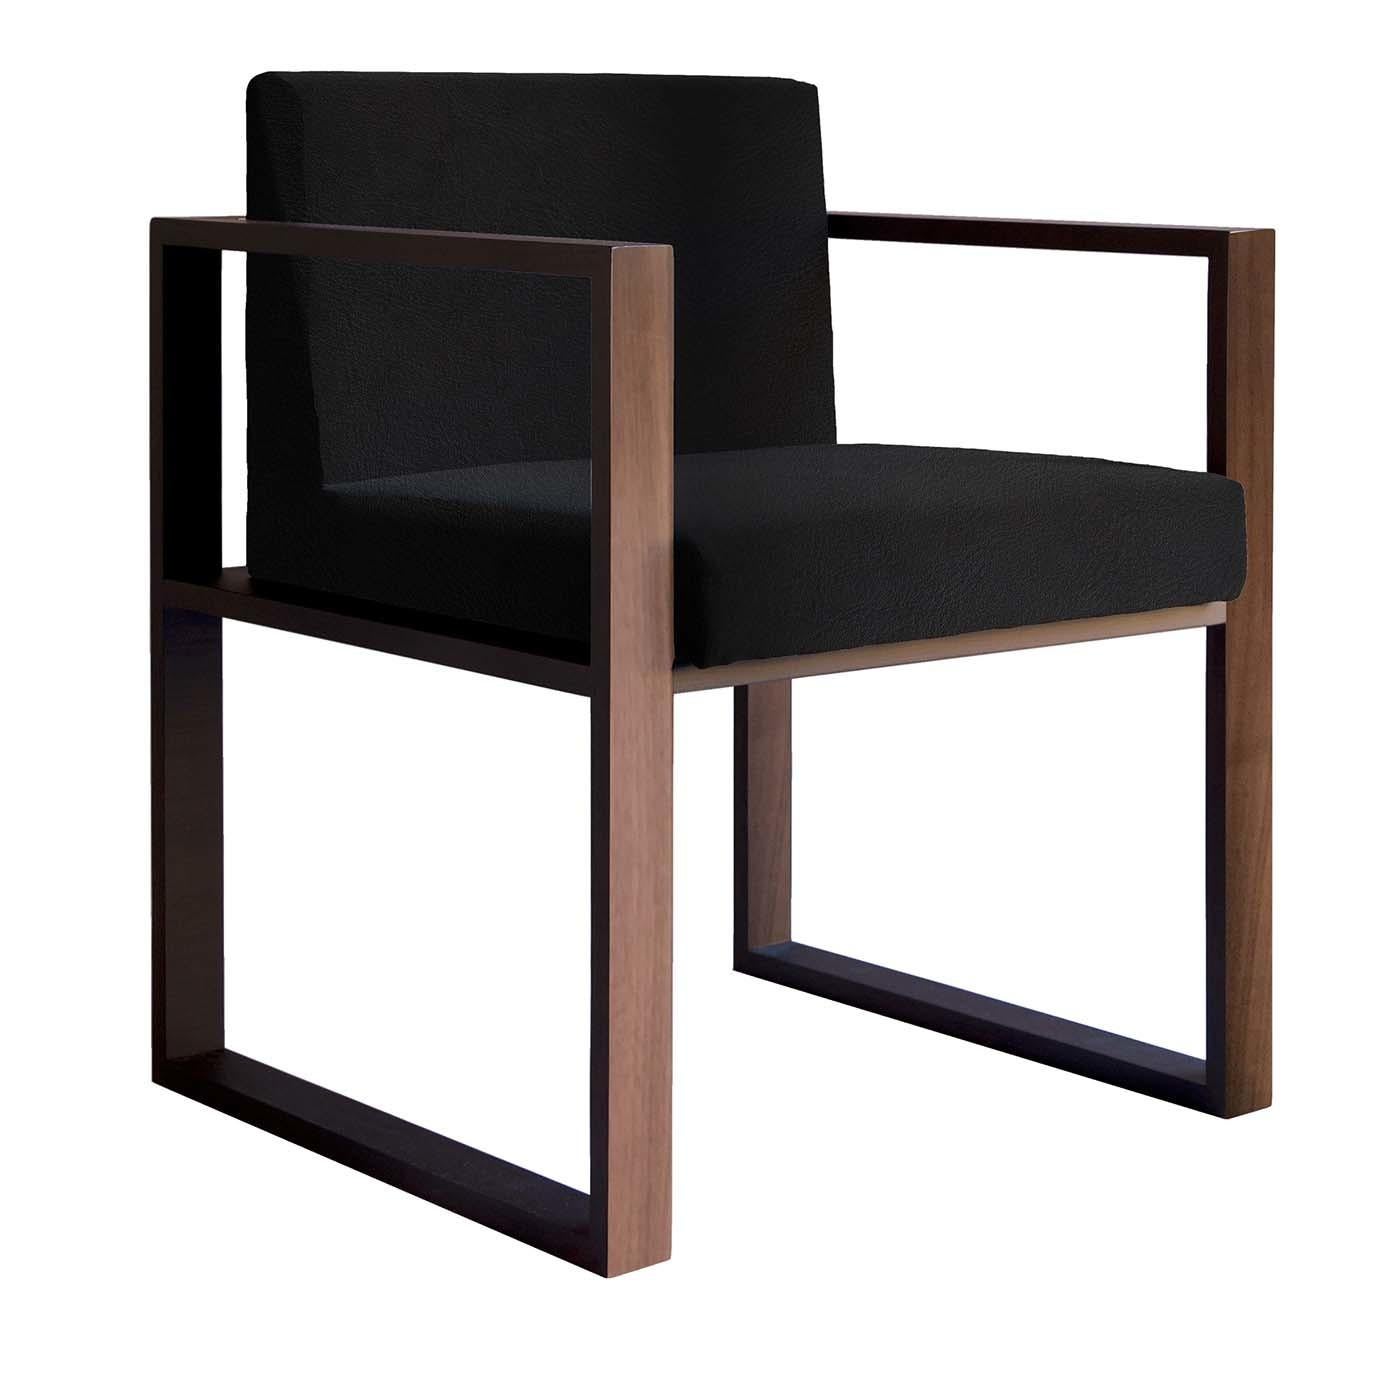 A clean and contemporary design characterize the stylish Vienna NL1 Chair featuring a structure in Canaletto Walnut wood. Providing exceptional comfort are the padded seat and back, luxuriously upholstered in black full-grain leather. With its